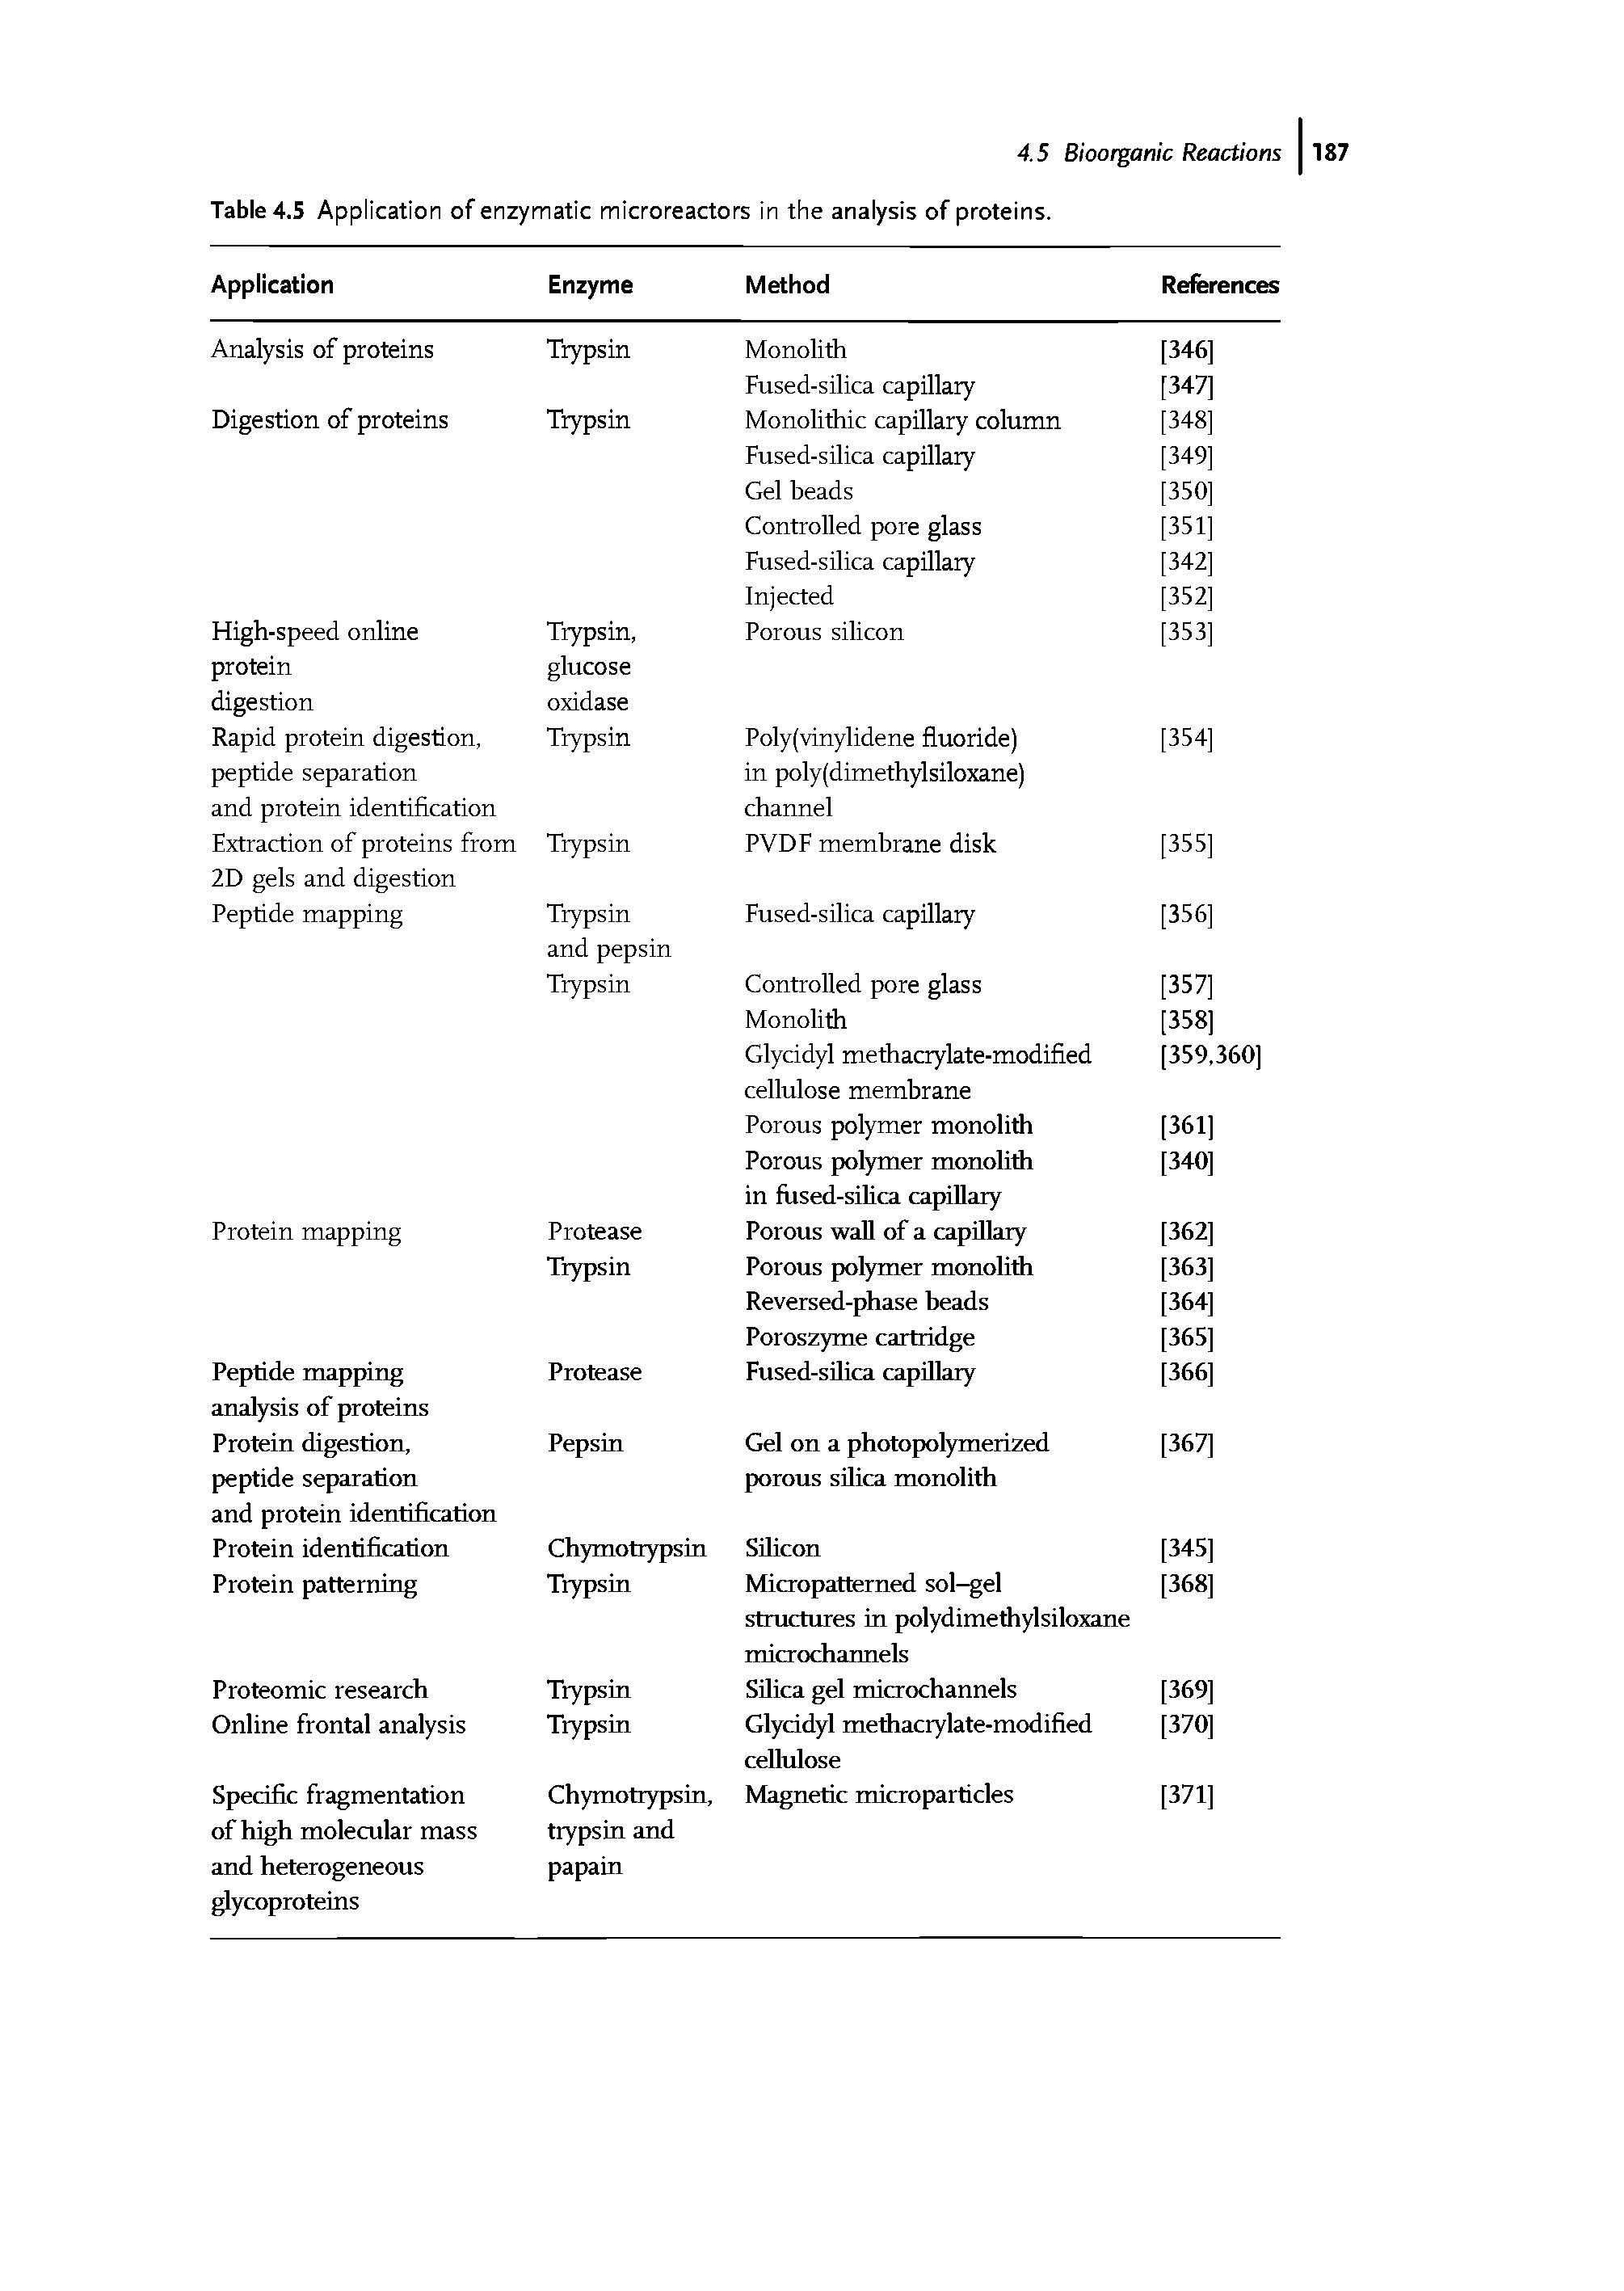 Table 4.5 Application of enzymatic microreactors in the analysis of proteins.